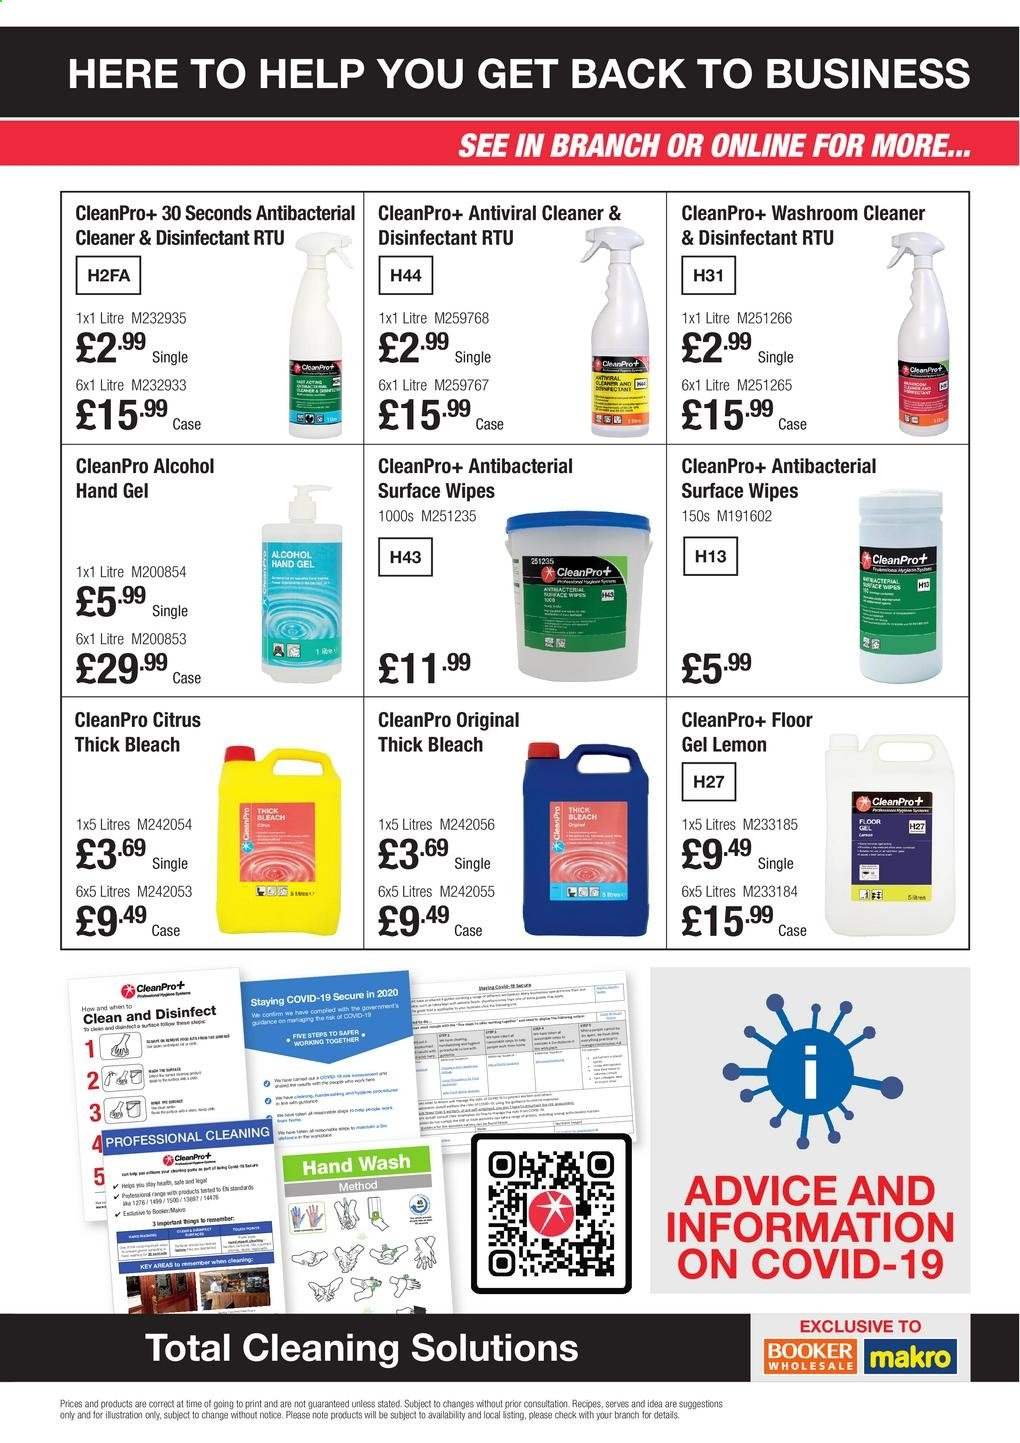 Makro offer  - Sales products - alcohol, Ace, wipes, cleaner, bleach, desinfection, thick bleach, hand wash, hand gel. Page 2.